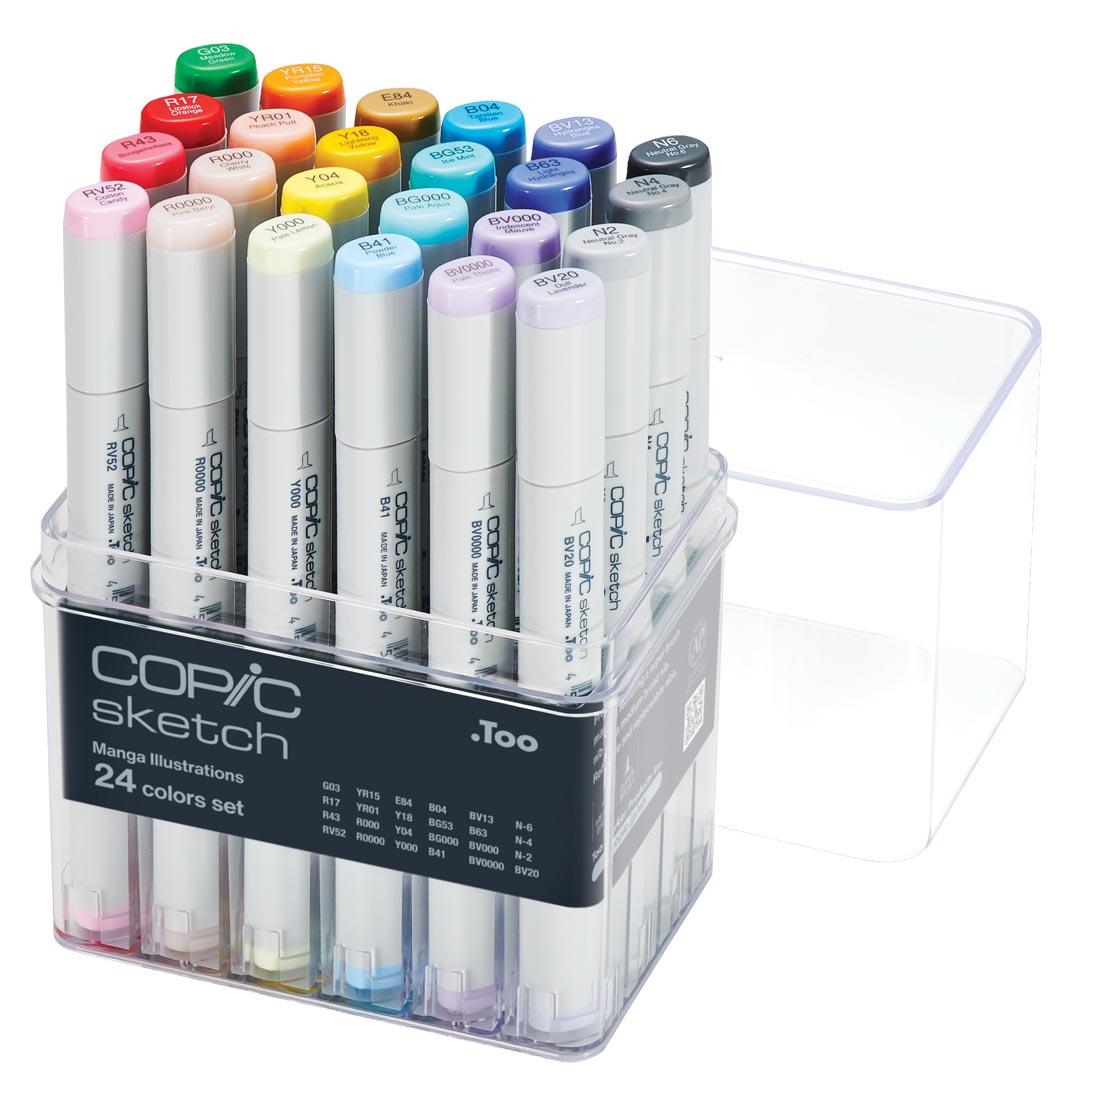 COPIC Sketch Markers 24-Color Manga Illustrations Set with package lid off